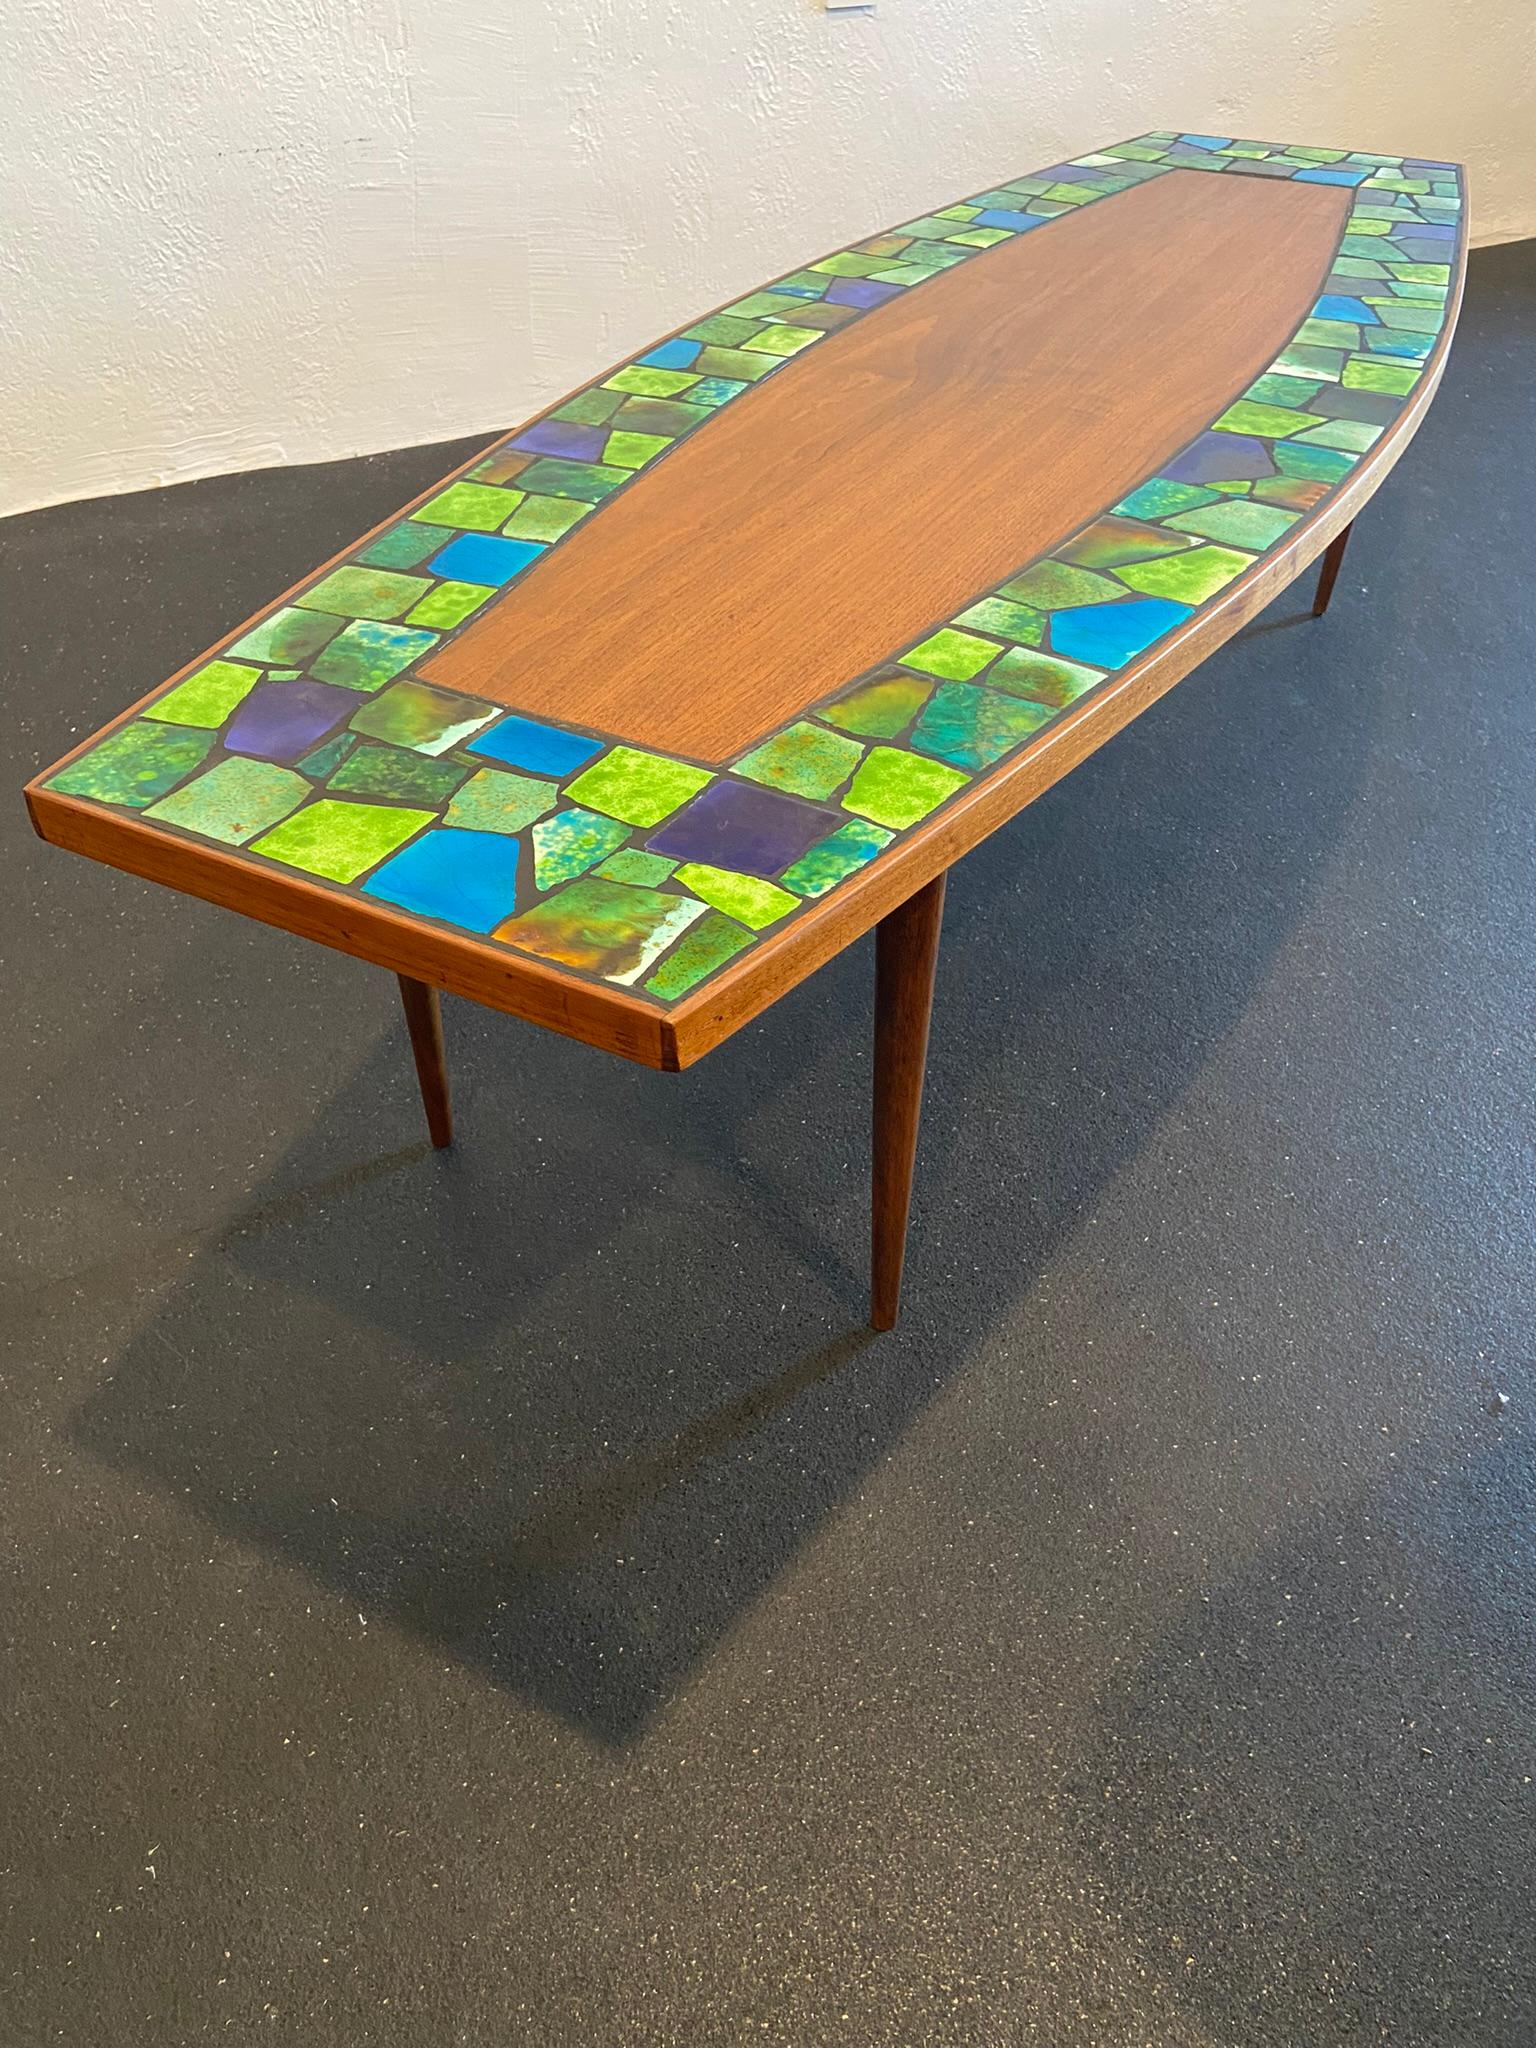 Martz style ceramic tile inlaid walnut coffee table. No makers marks. Extremely rare form. Beautiful variety of colors, shades of blues and greens. Table has been refinished.

Would work well in a variety of interiors such as modern, mid century